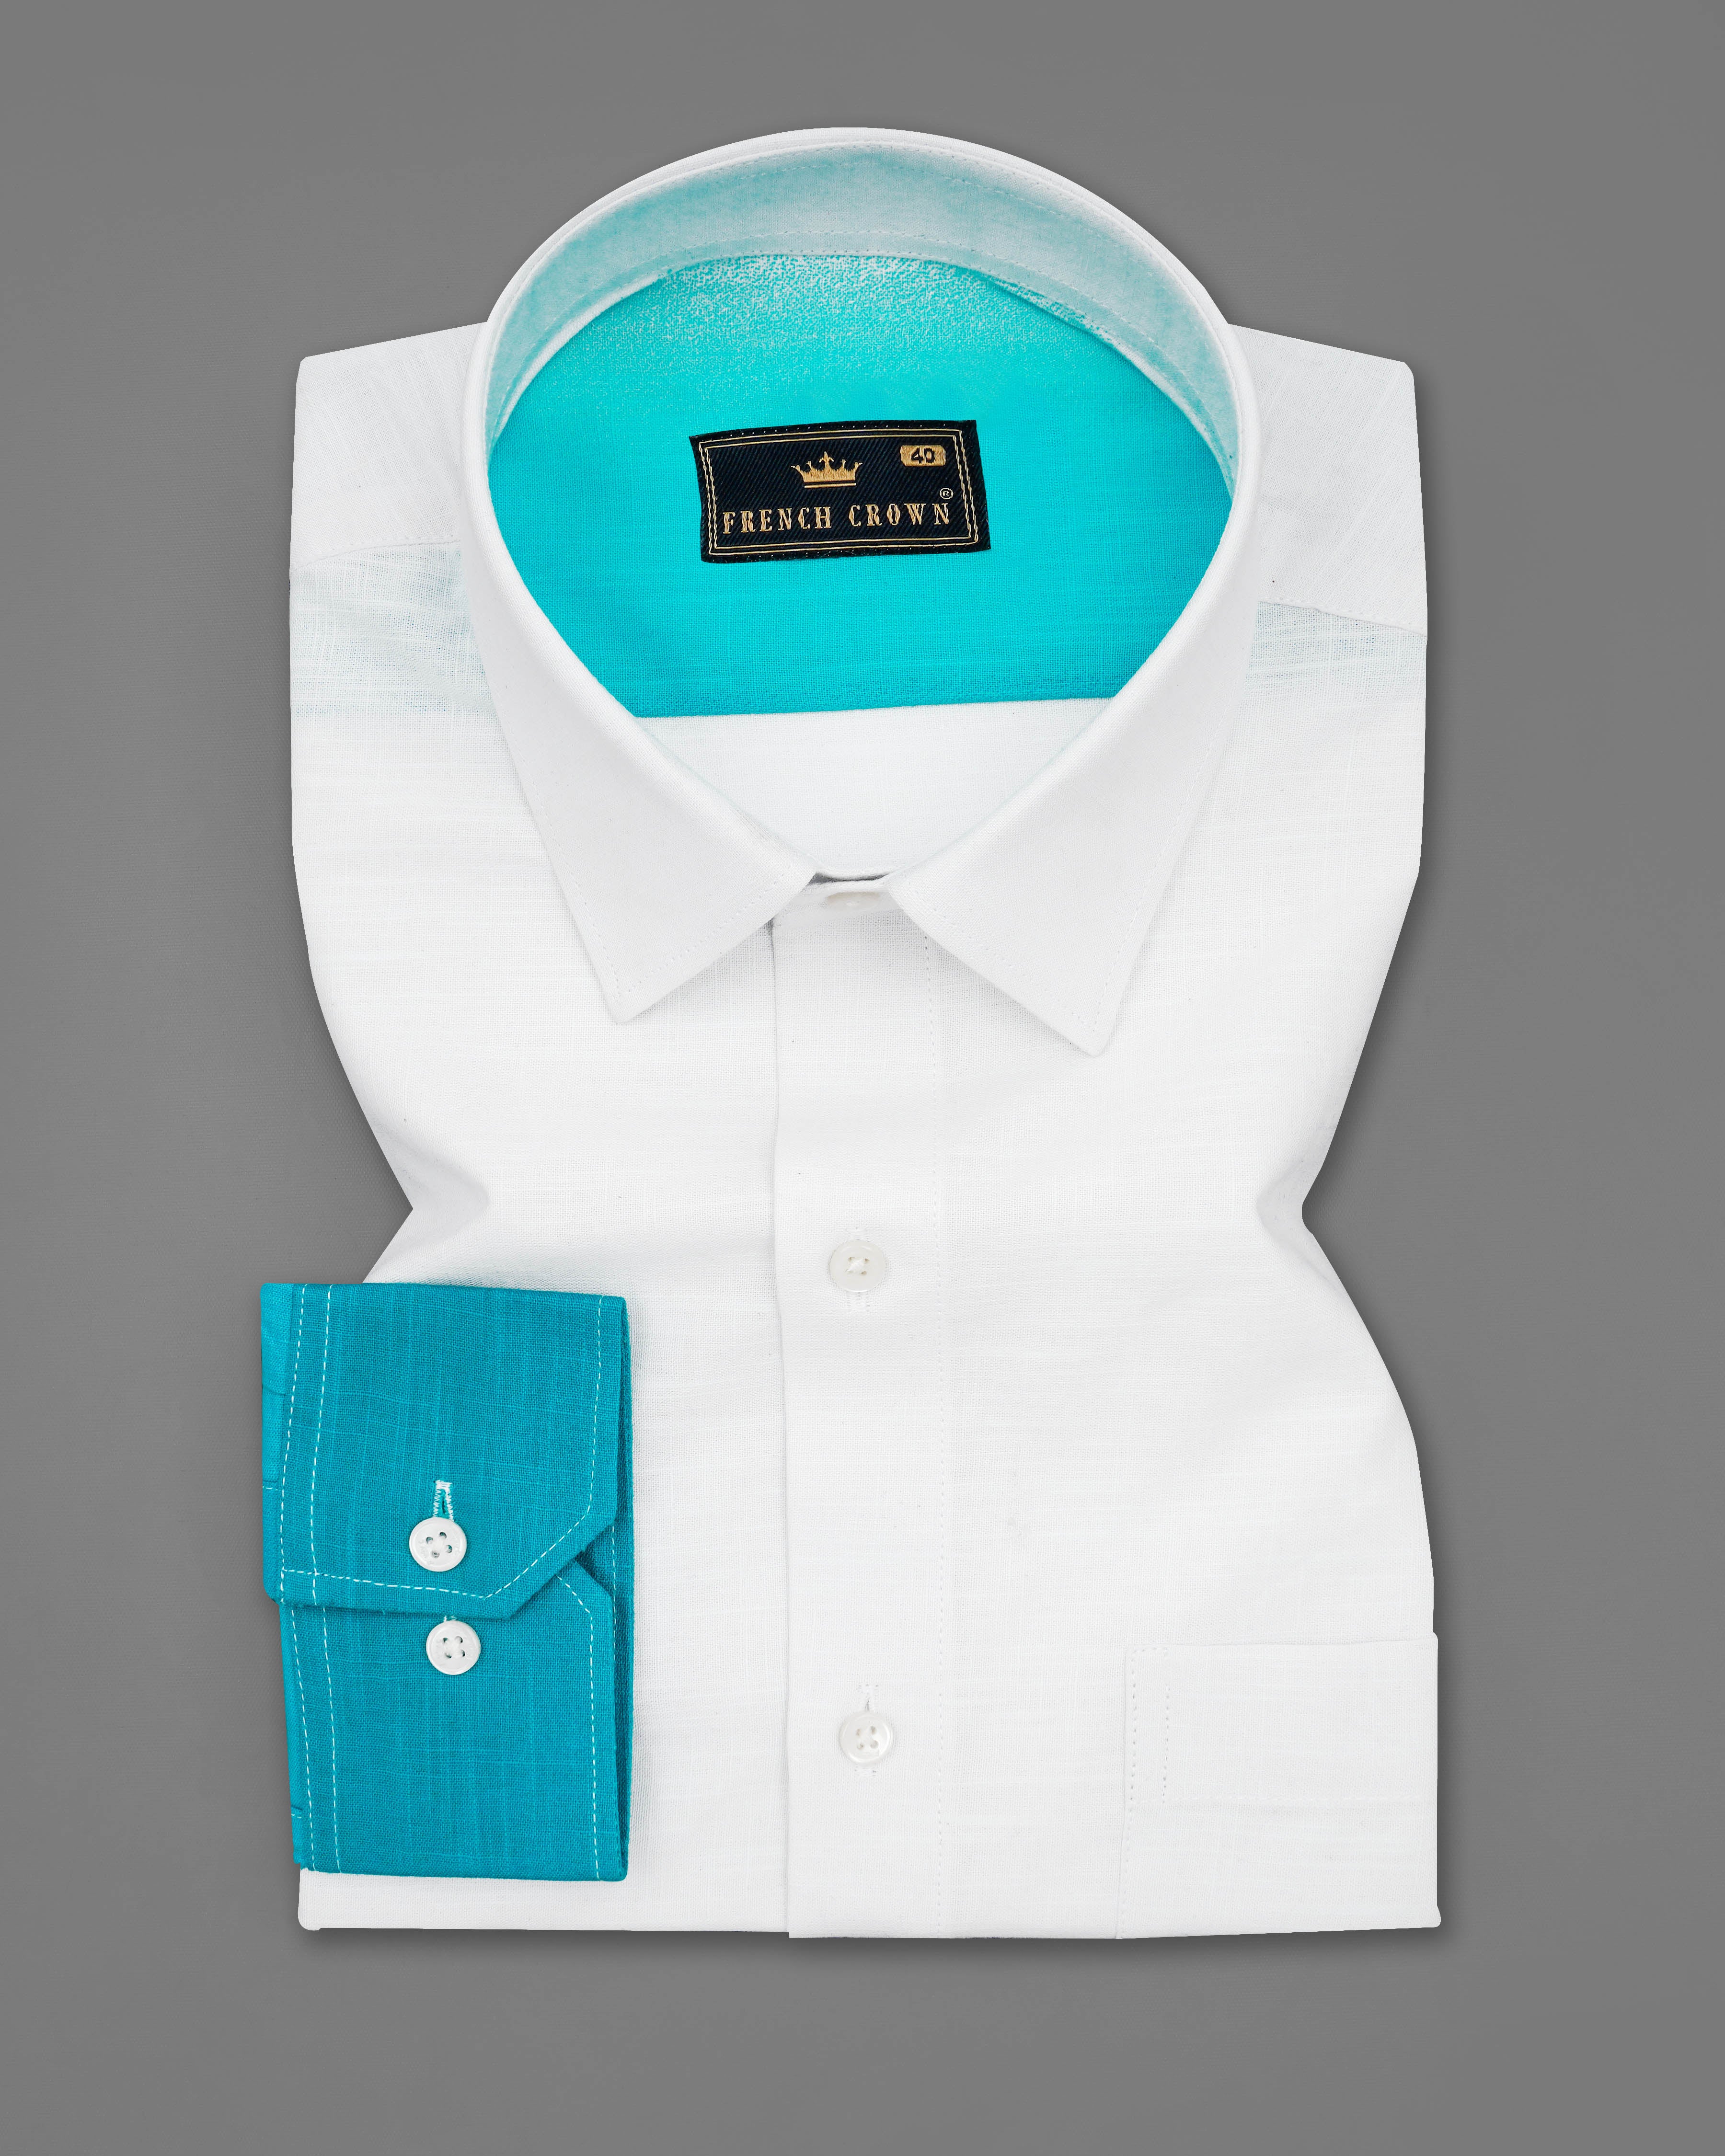 Bright White and Dark Turquoise Blue Chambray Textured Premium Cotton 8186-38, 8186-H-38, 8186-39, 8186-H-39, 8186-40, 8186-H-40, 8186-42, 8186-H-42, 8186-44, 8186-H-44, 8186-46, 8186-H-46, 8186-48, 8186-H-48, 8186-50, 8186-H-50, 8186-52, 8186-H-52